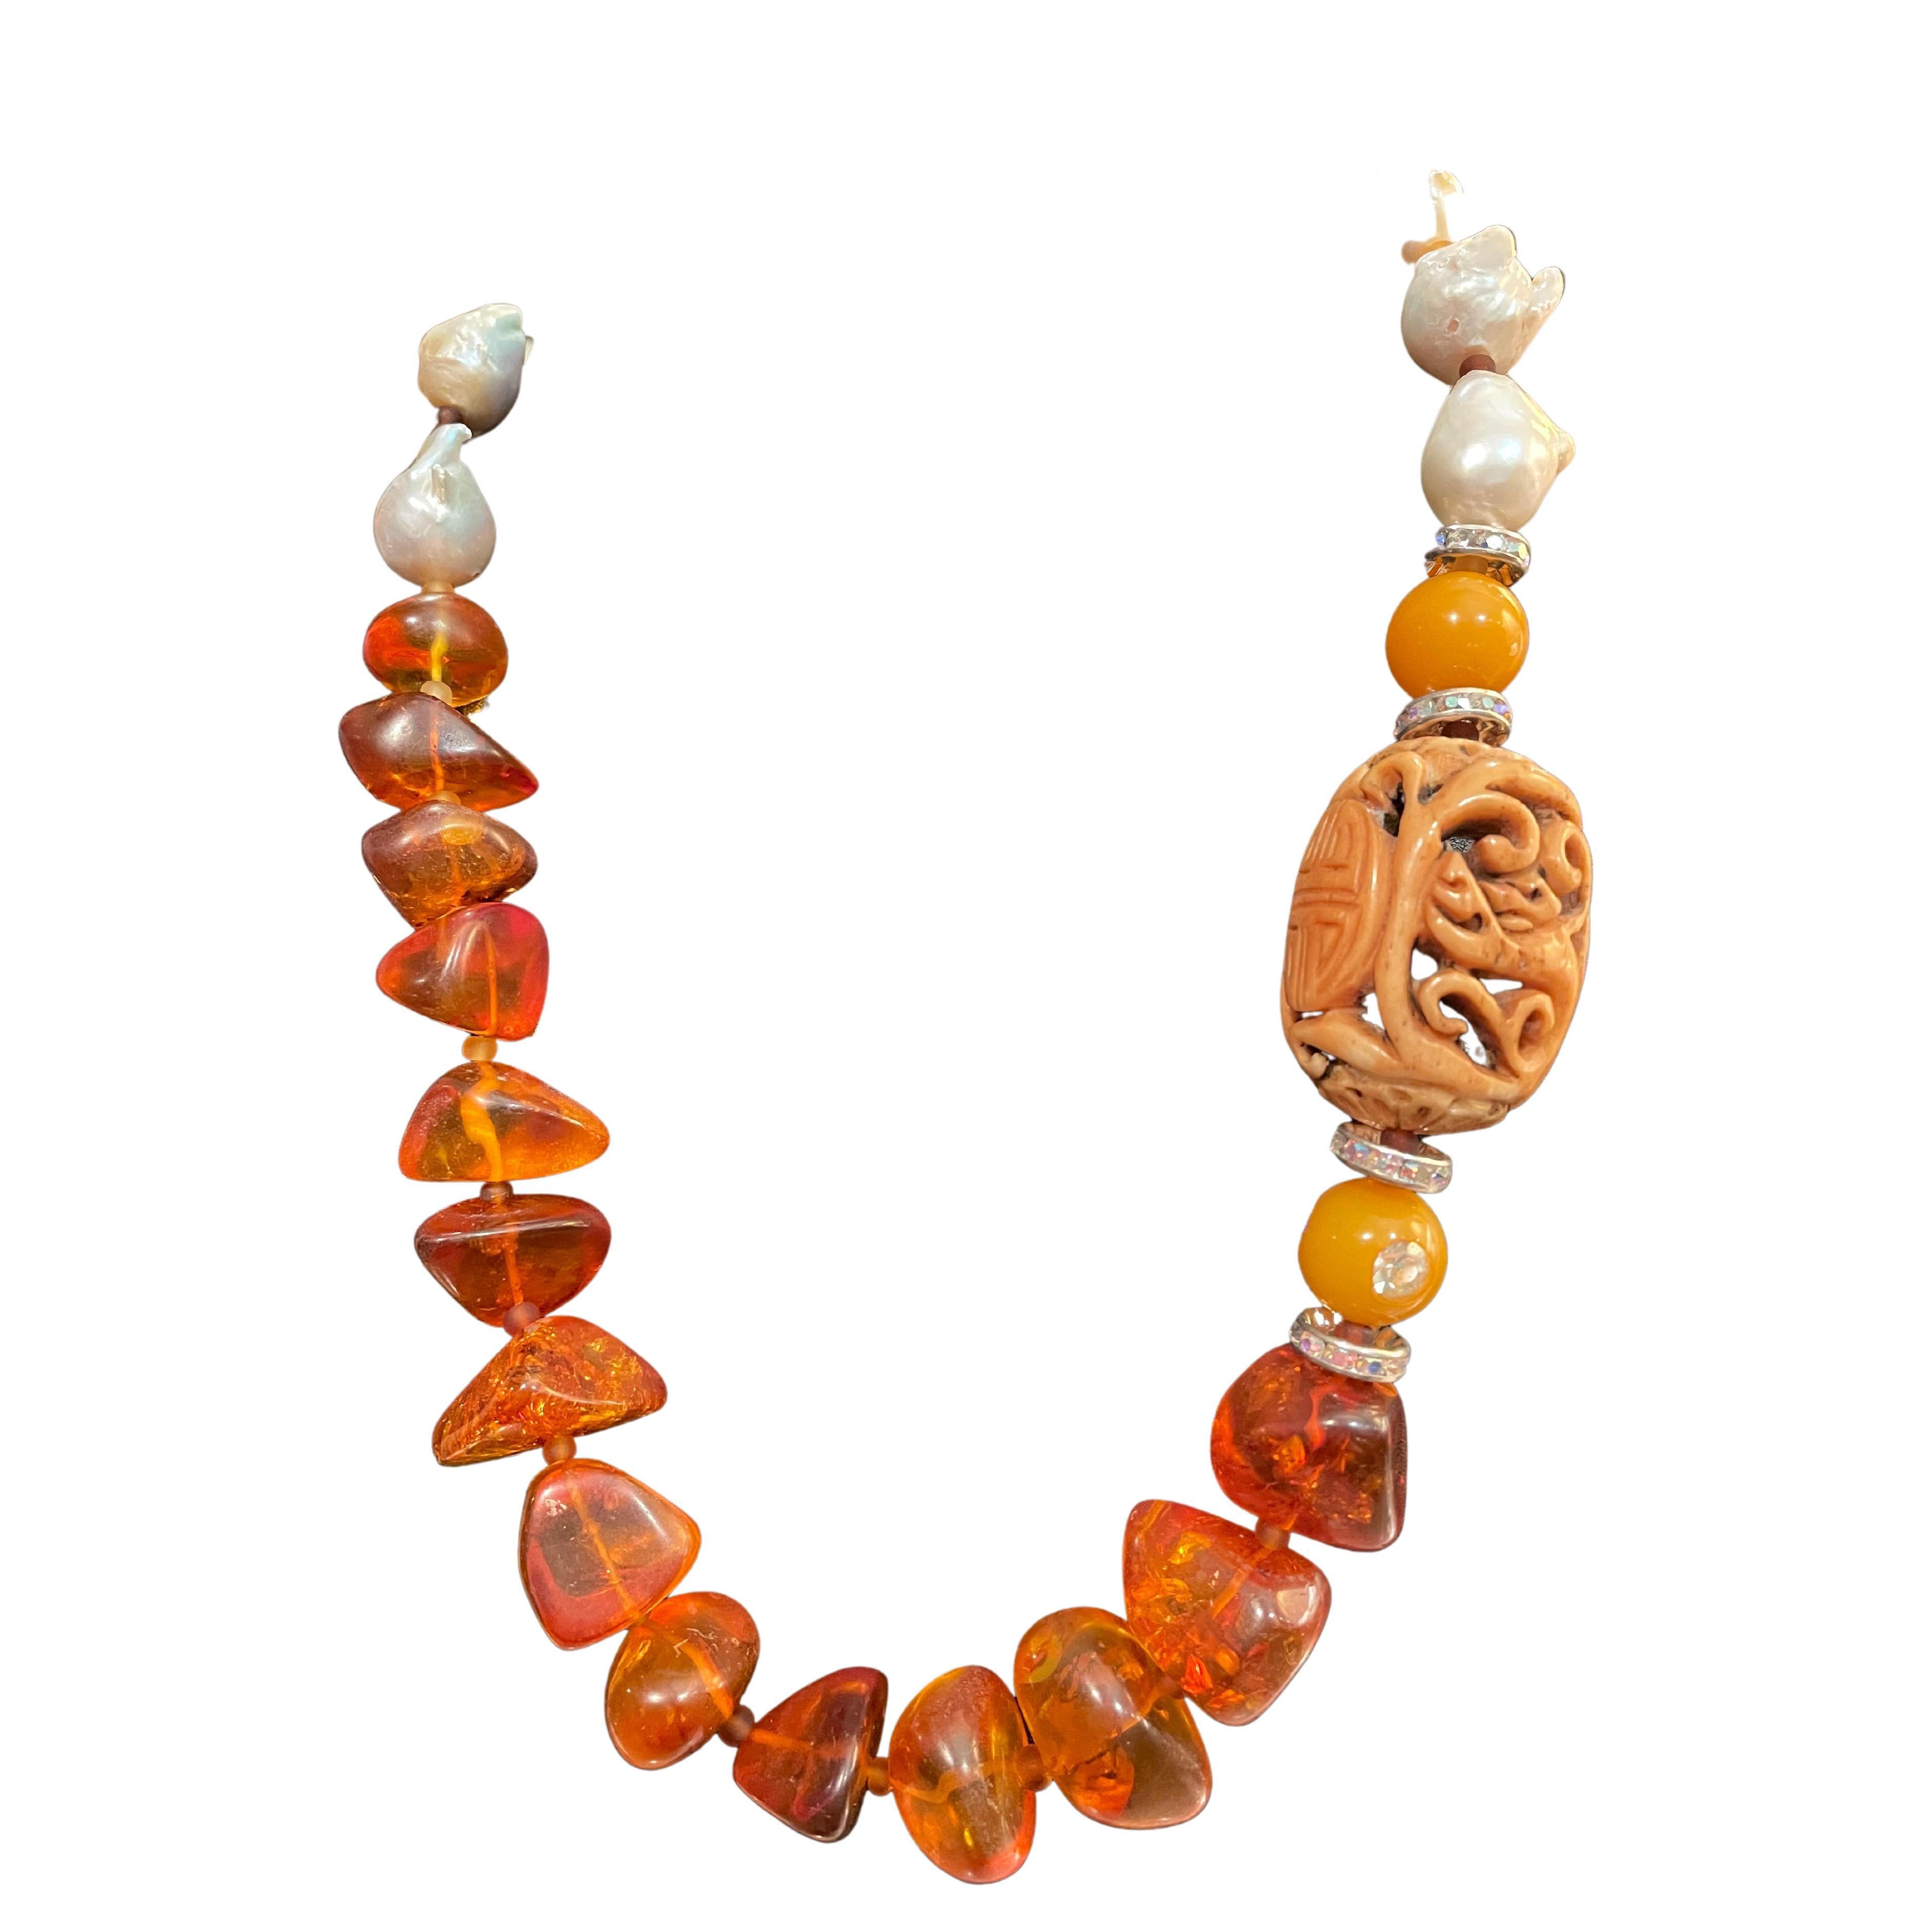 Baltic Amber, Chinese soapstone, Bakelite, baroque pearls necklace from Lorraine